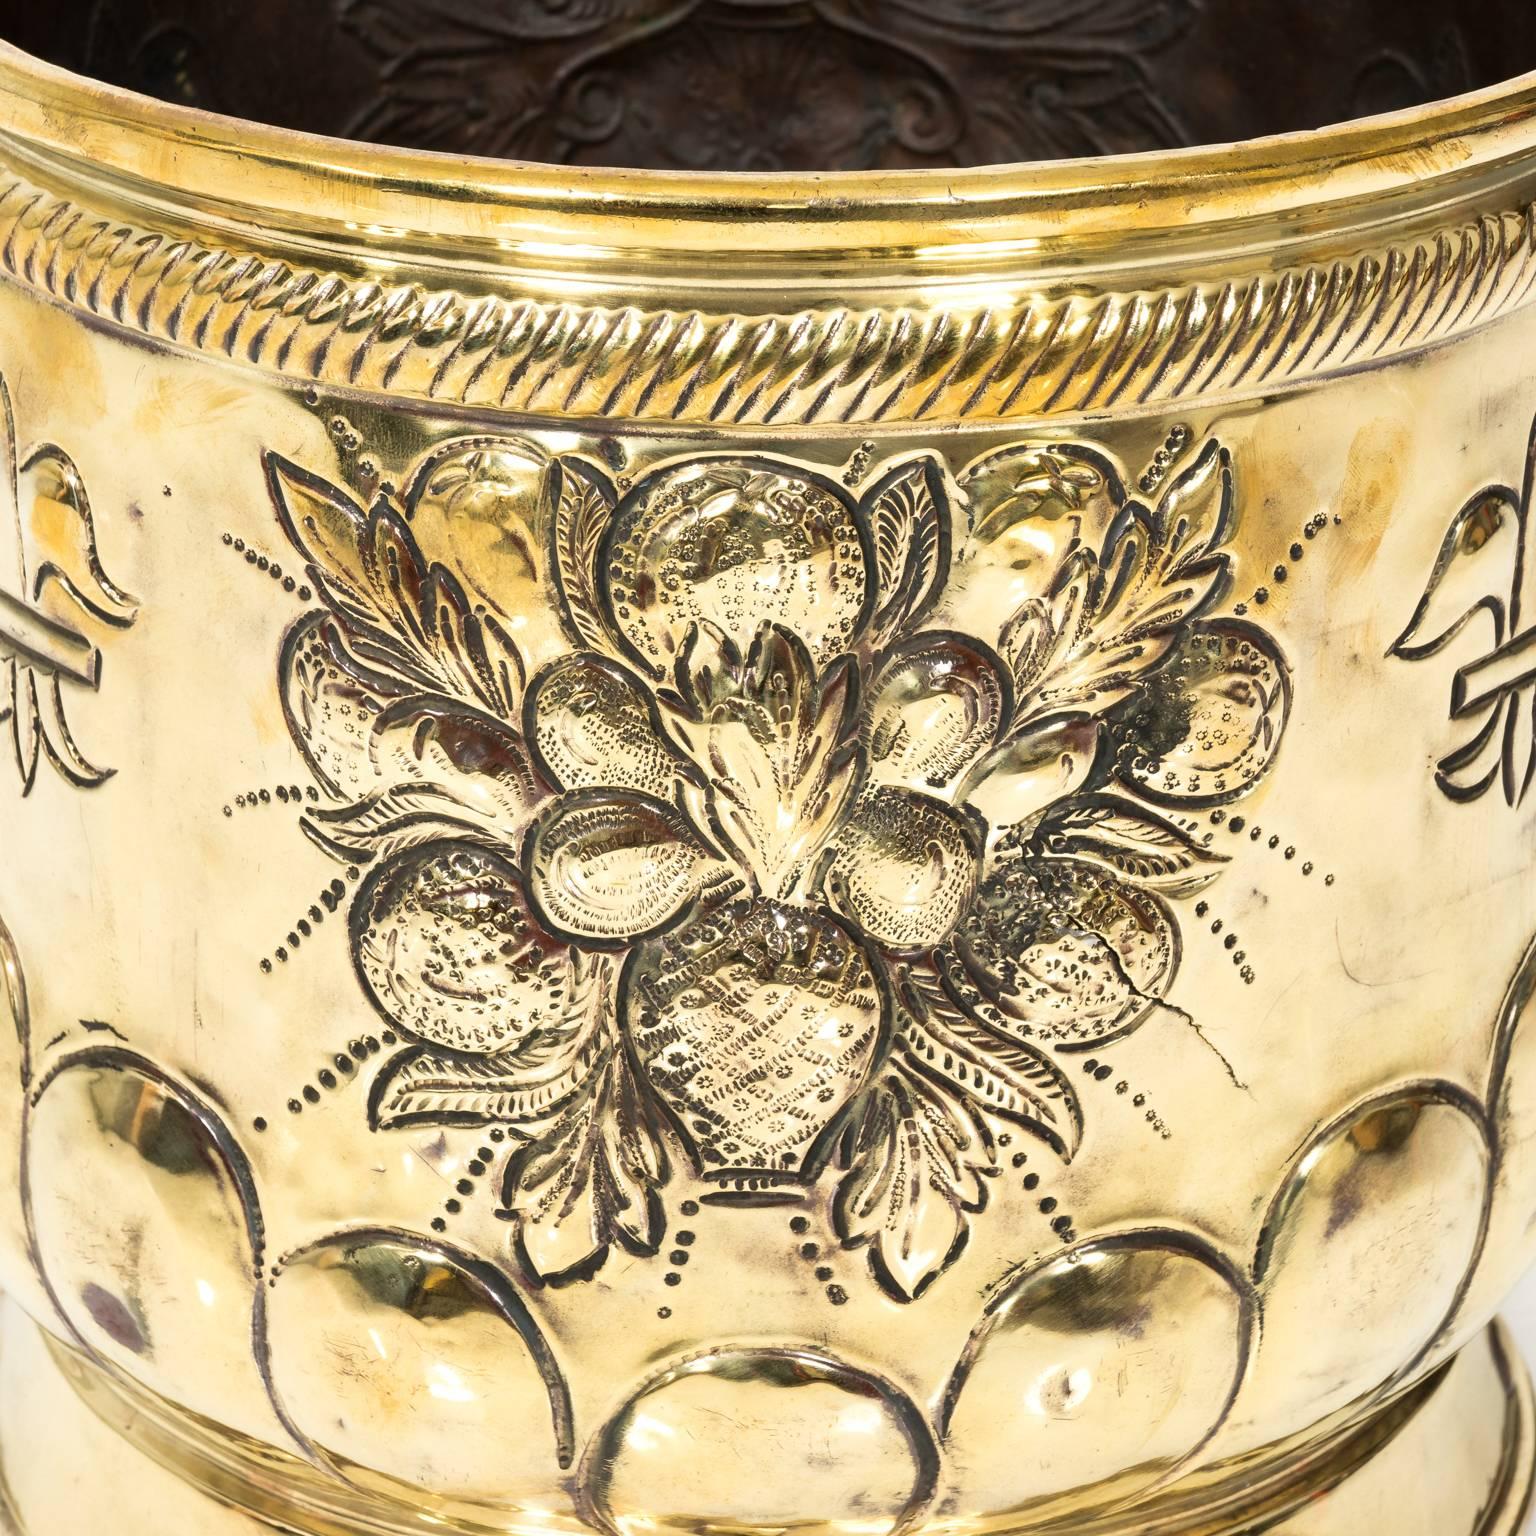 Embossed brass planter with lions head handles and fleur-de-lis detail, circa 1870.
 